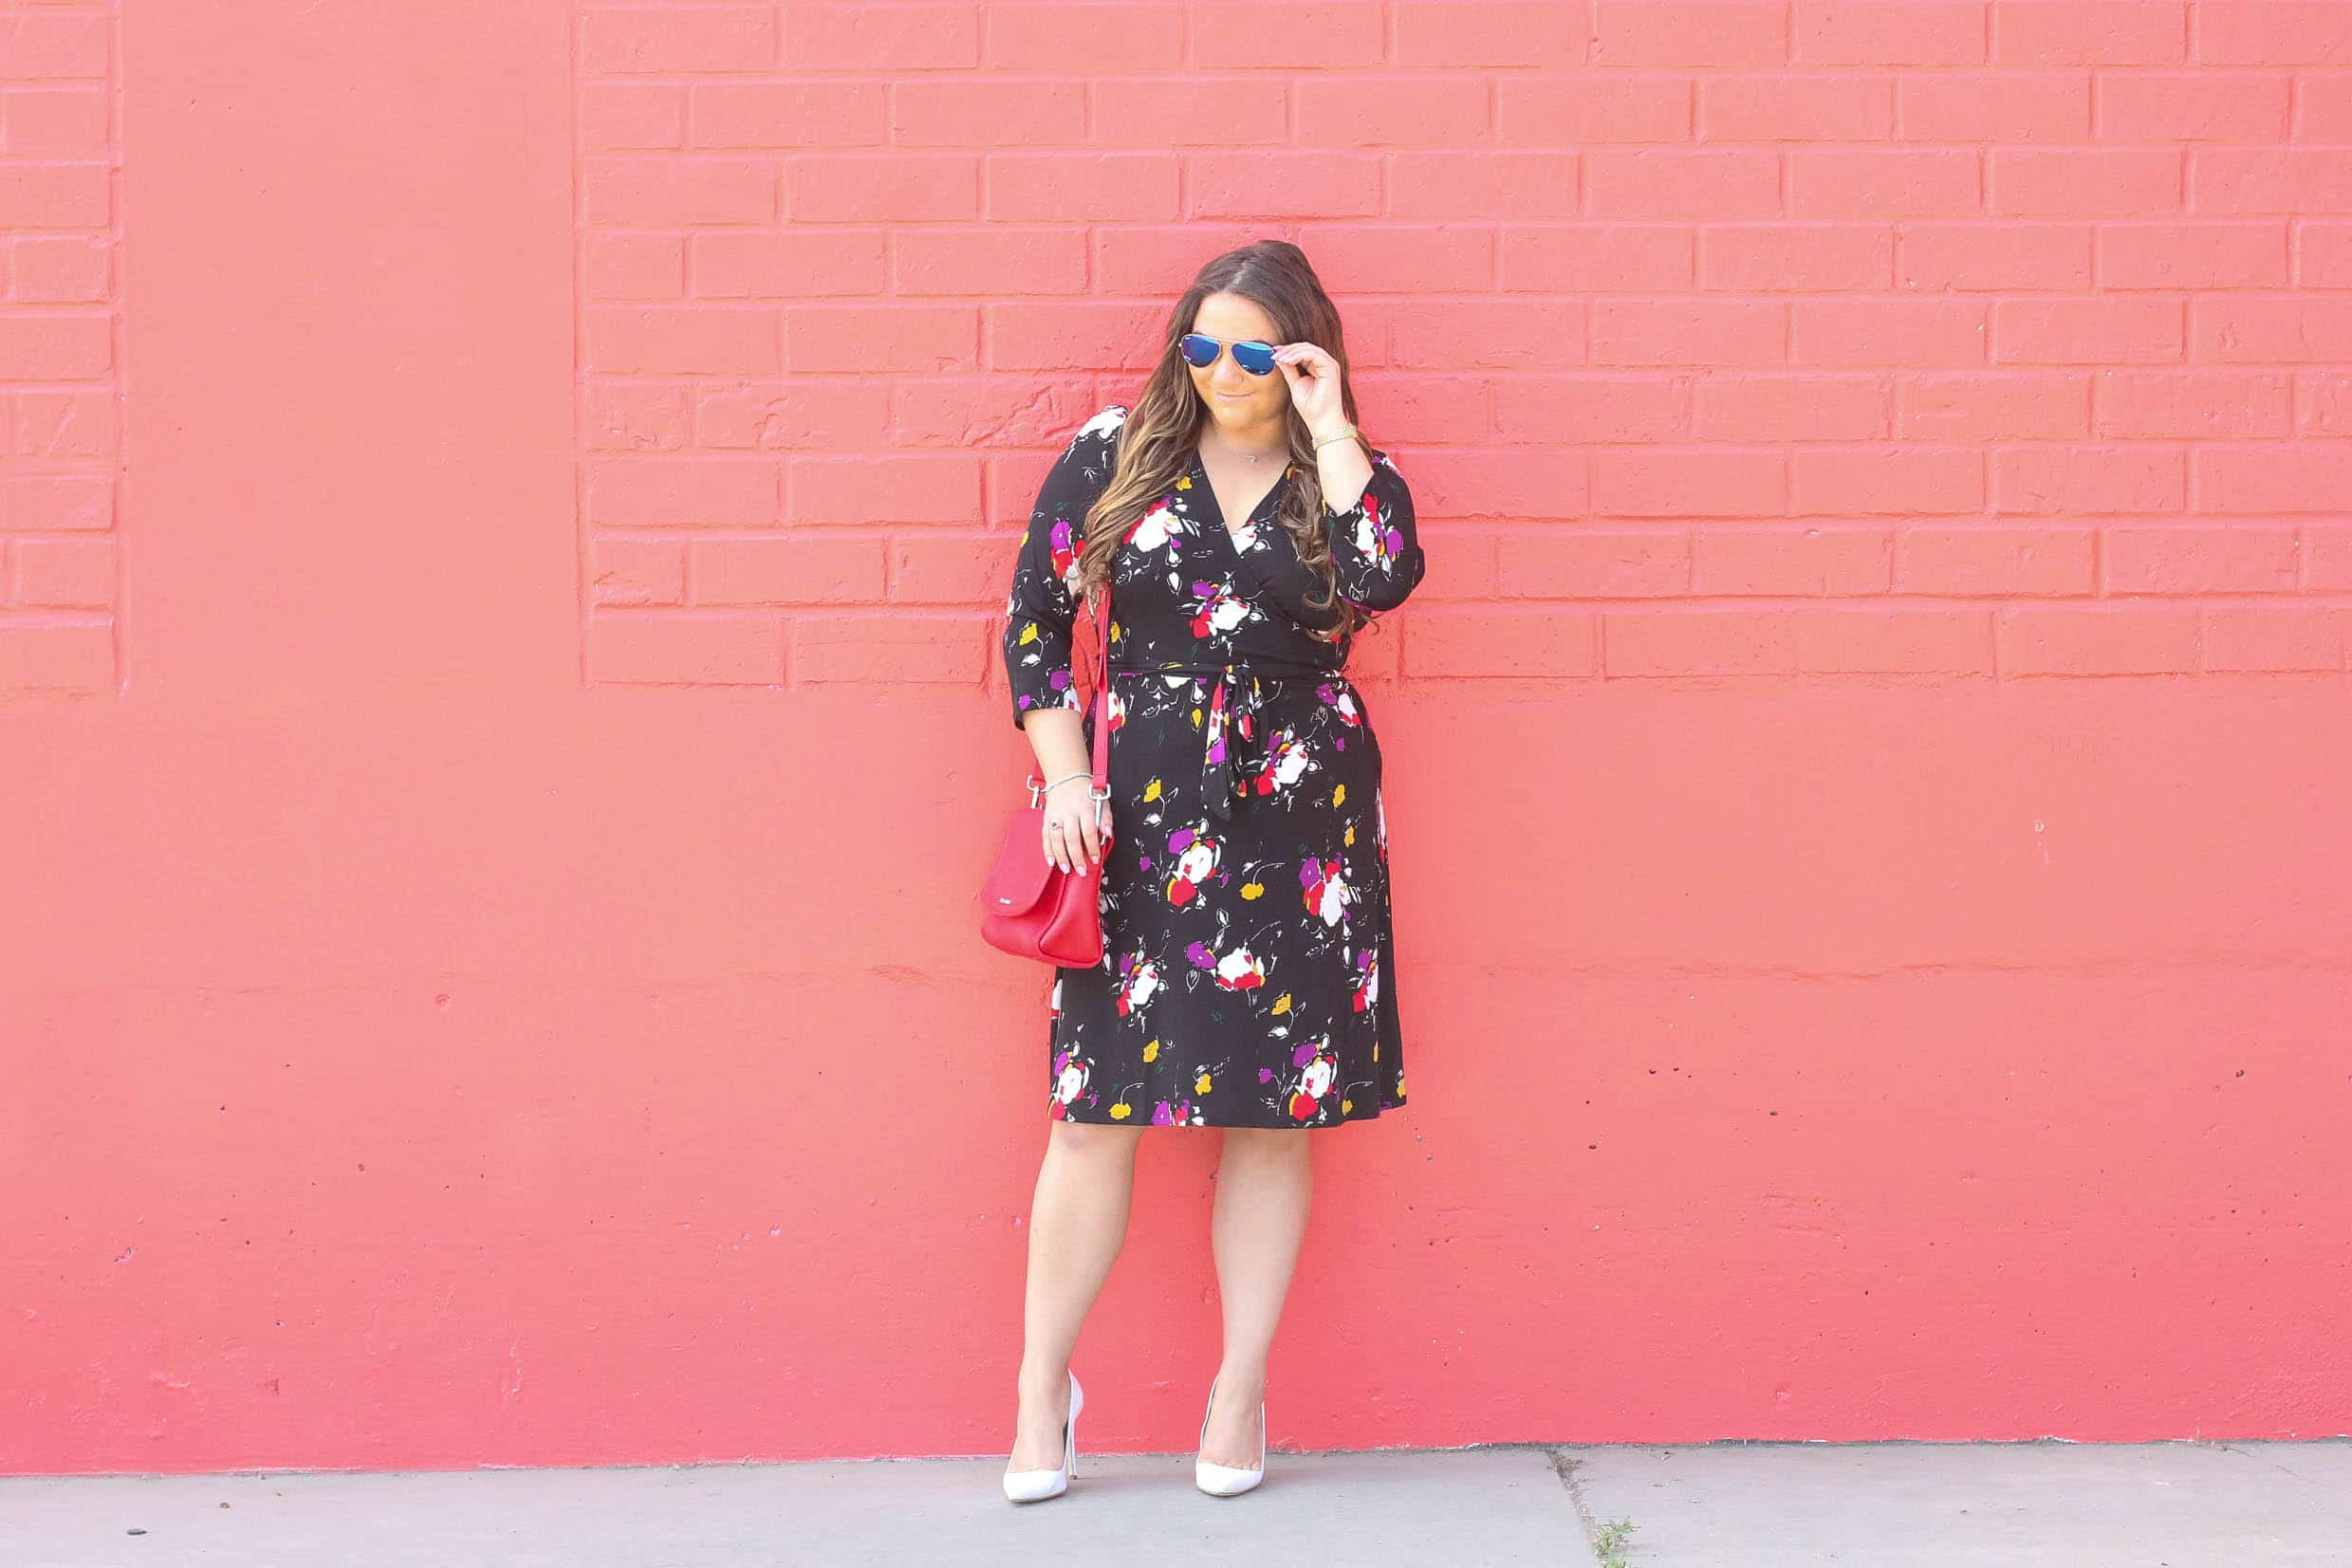 missyonmadison, missyonmadison instagram, fashion blogger, la blogger, style blogger, miss locker bags, red bag, pop of color, wall crawl, leota new york, leota new york wrap dress, fall style, nordstrom, nordstrom wrap dress, white pumps, white pointed toe pumps, bloglovin, style goals, style diaries, fashion goals, fashion diaries,